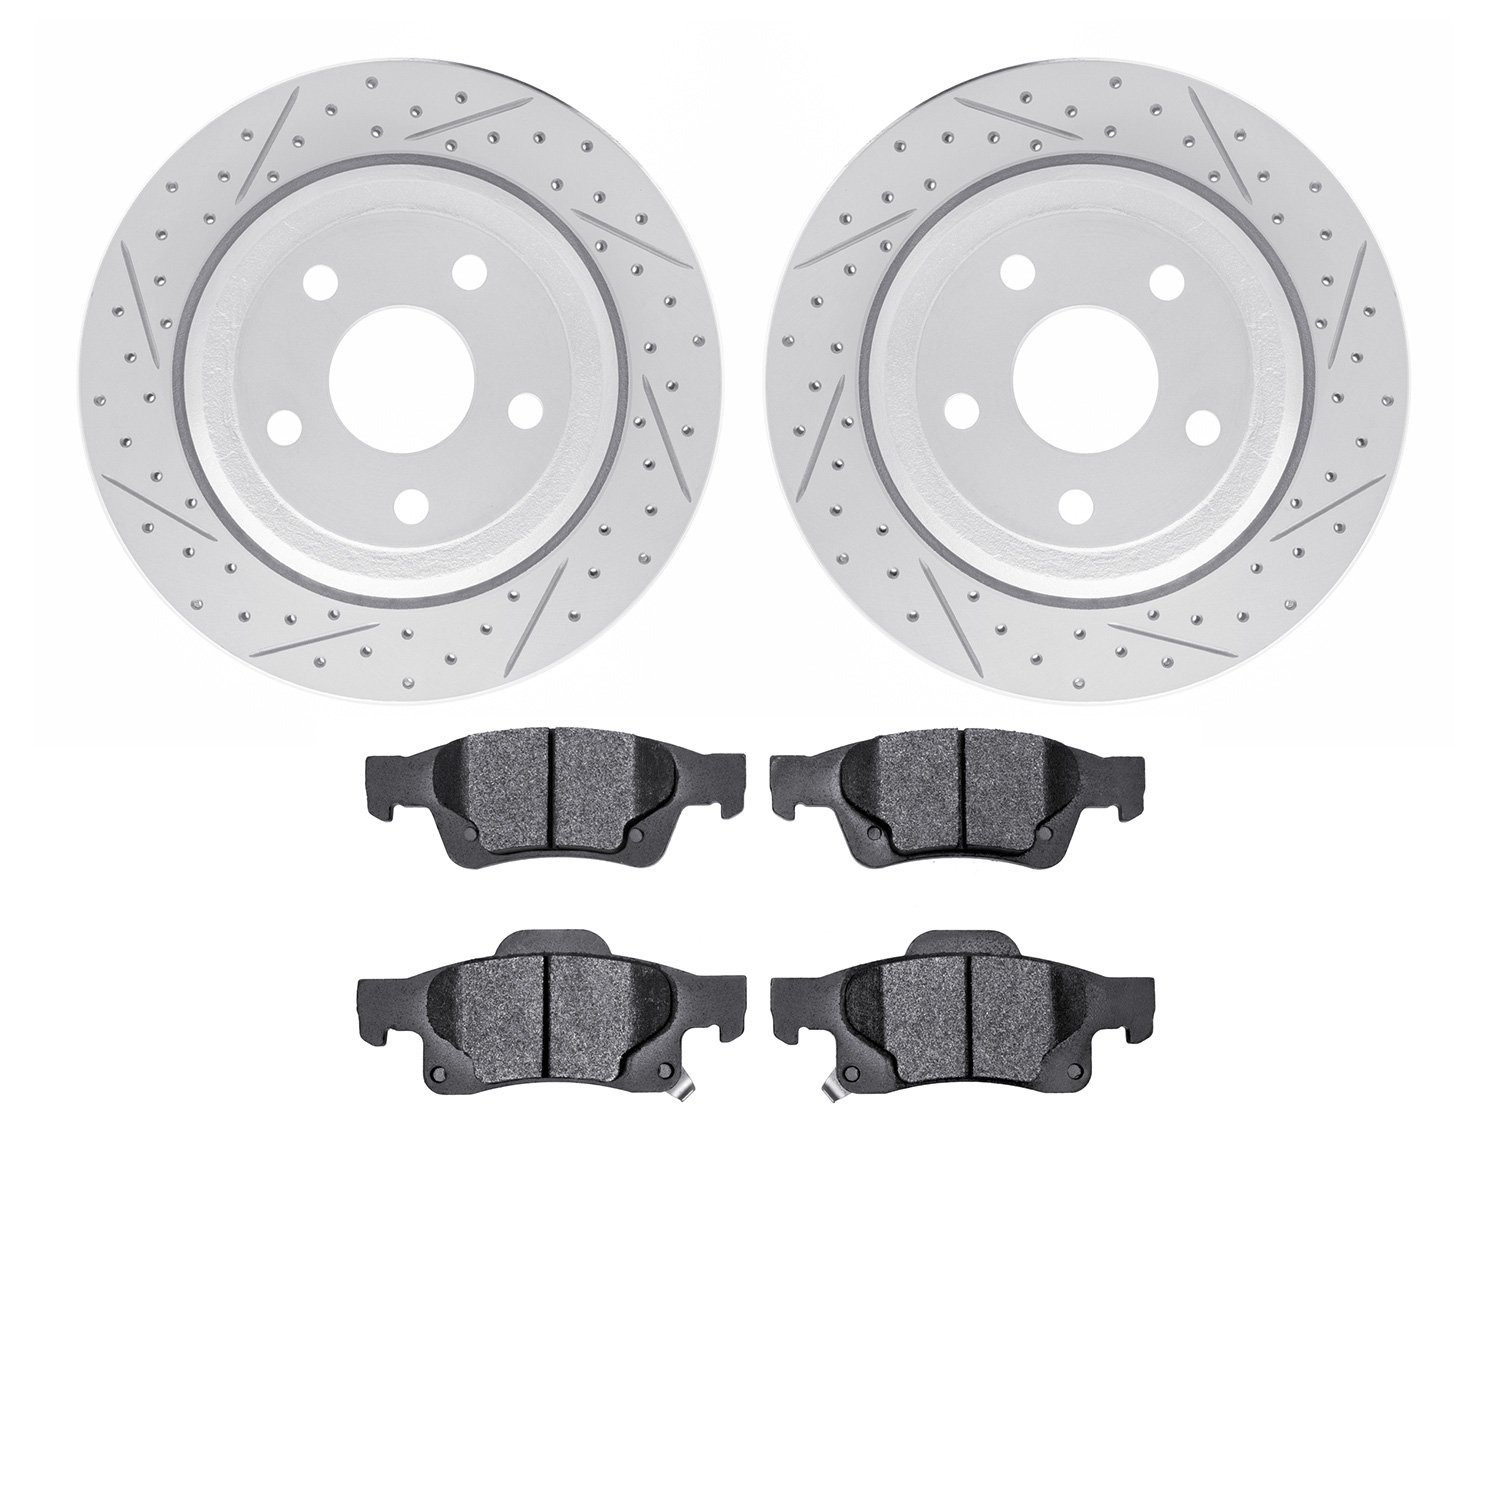 2402-42005 Geoperformance Drilled/Slotted Brake Rotors with Ultimate-Duty Brake Pads Kit, Fits Select Mopar, Position: Rear